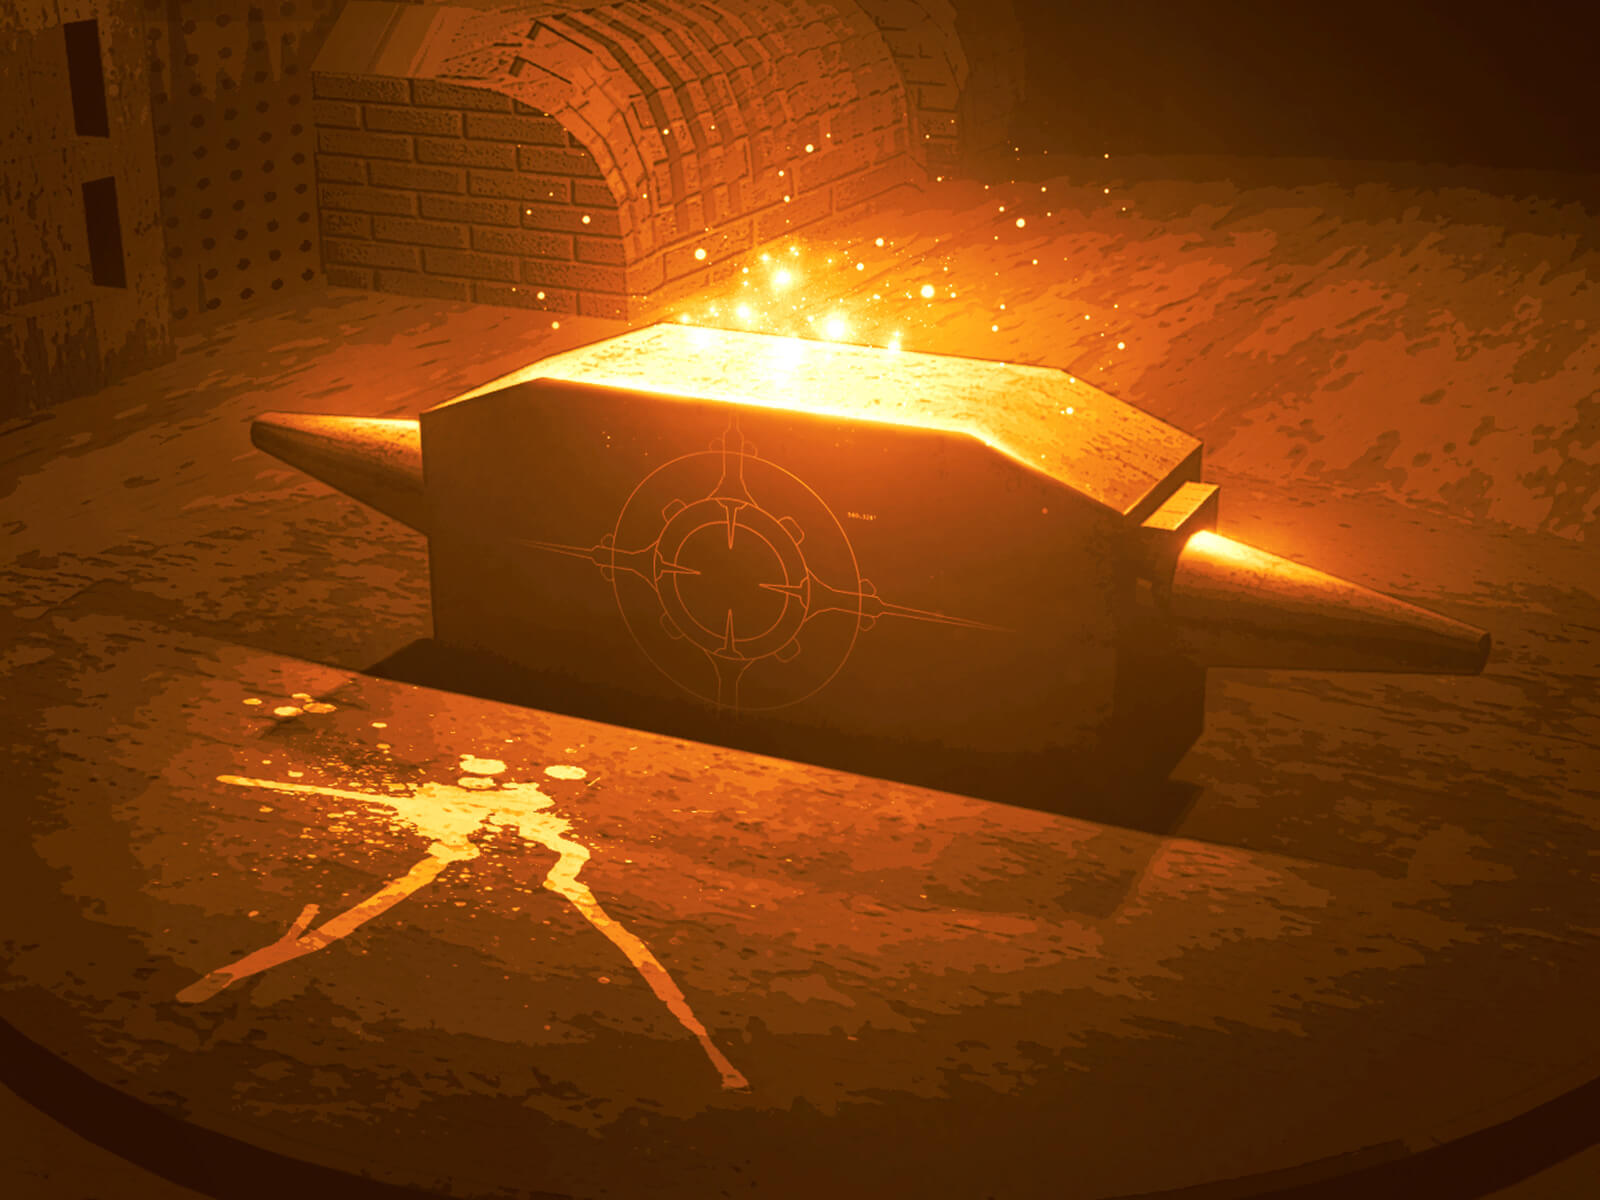 Digital painting of a scene in a dark chamber with a large anvil head at center atop a shallow pedestal, glowing from above.